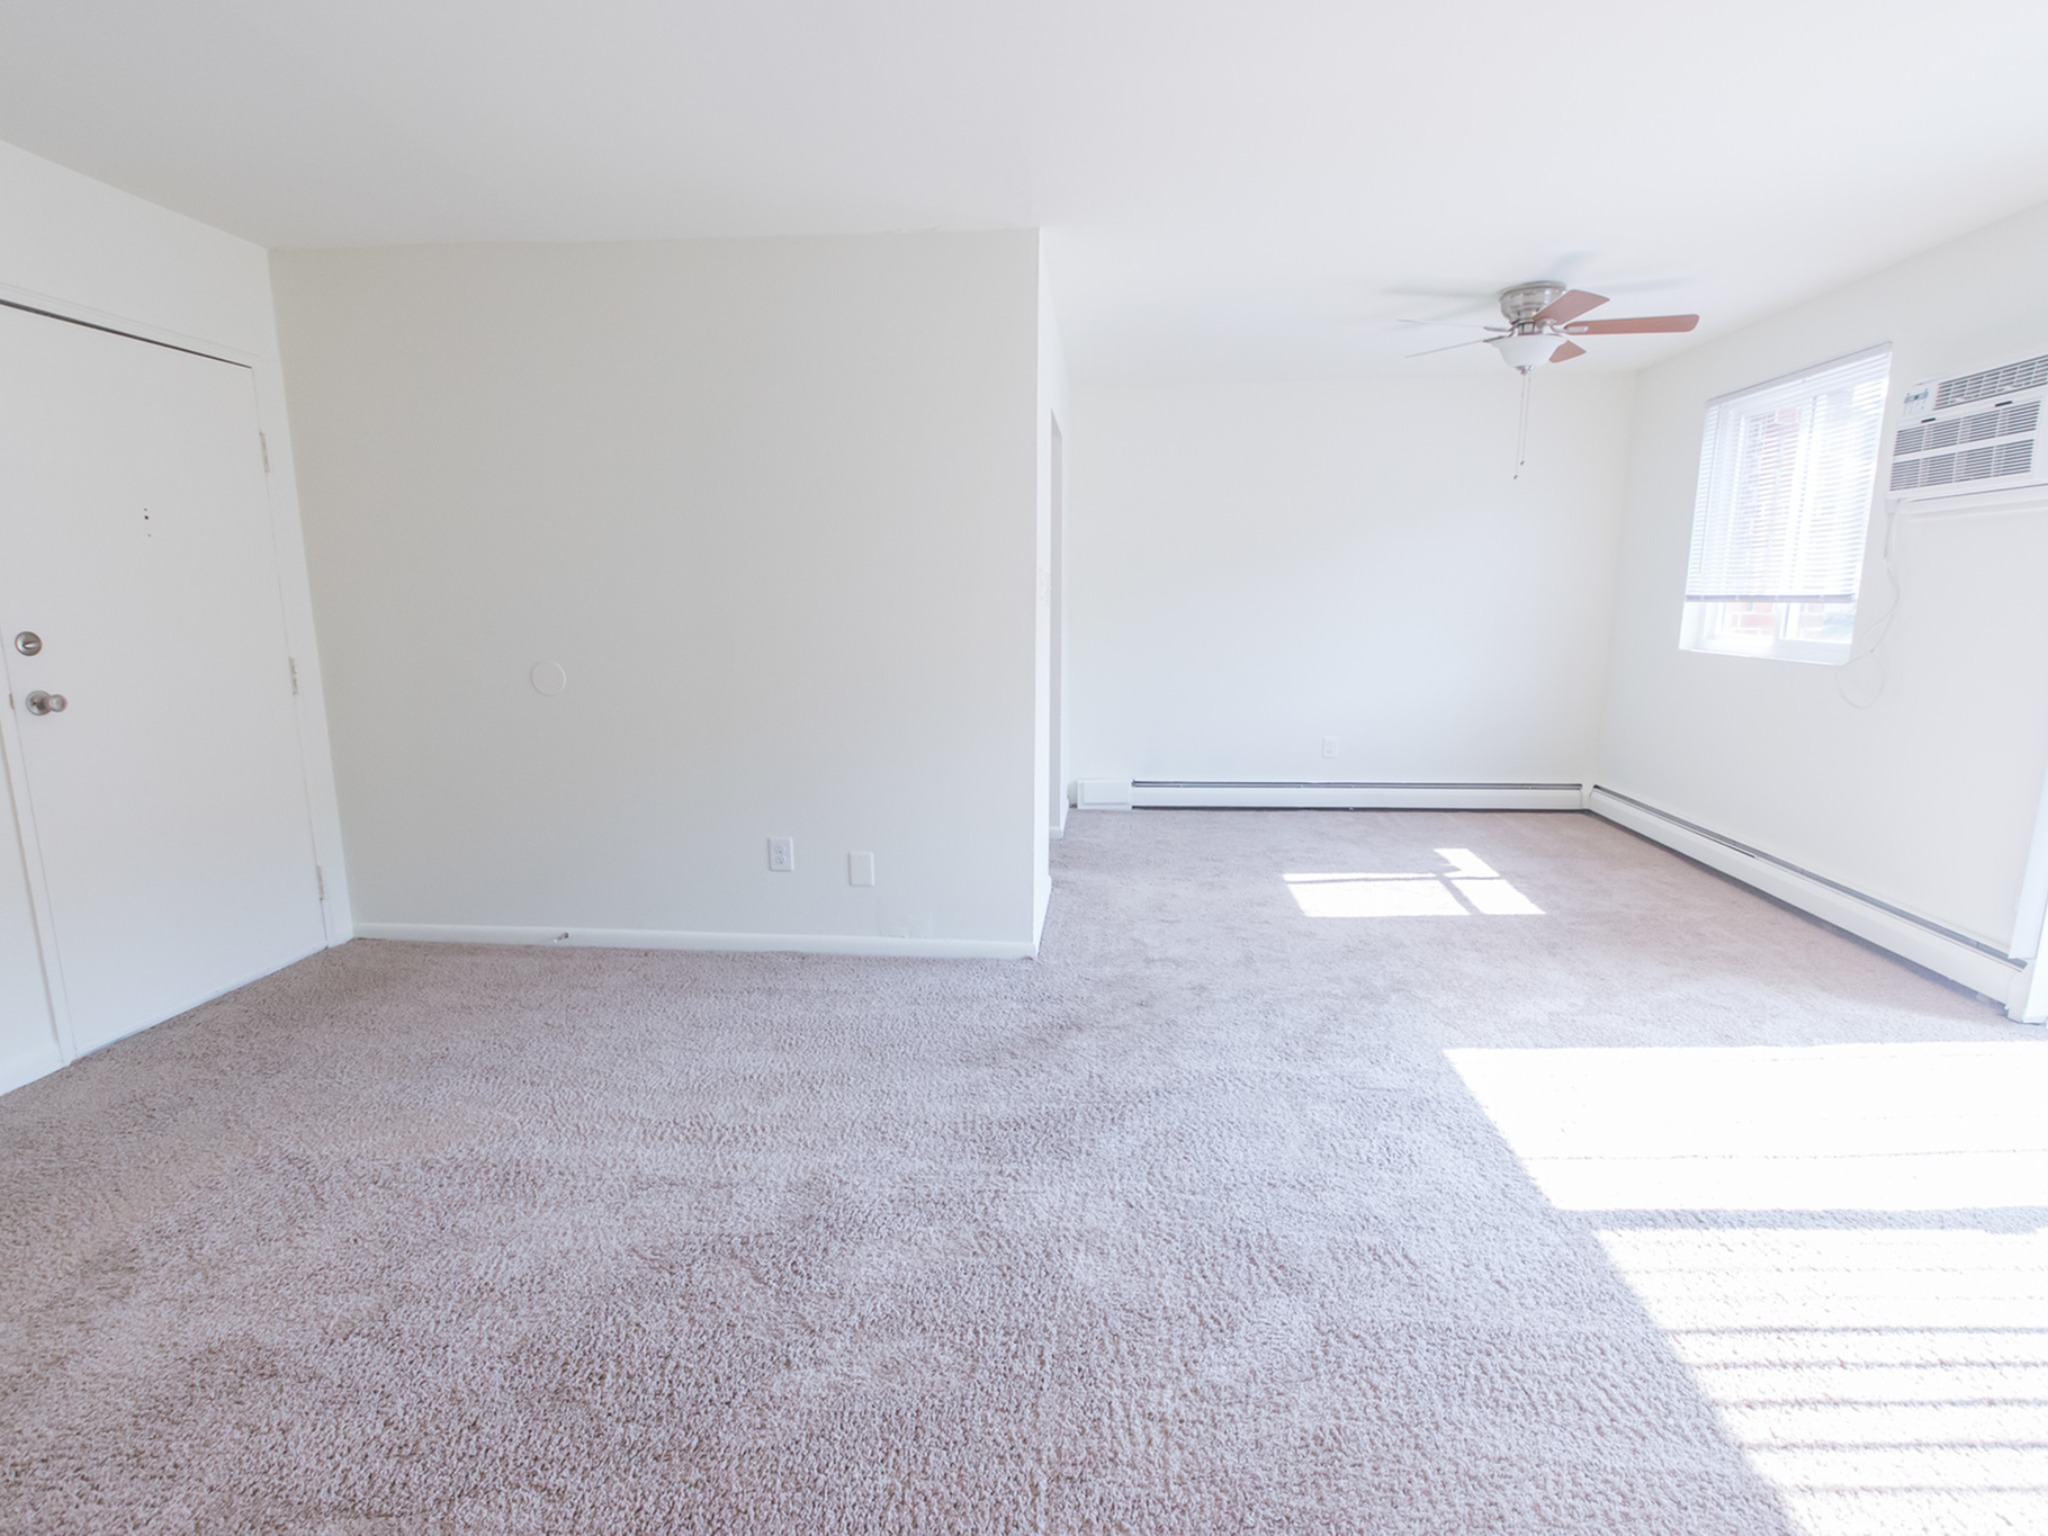 Living room area of an apartment unfurnished, fitted with carpet flooring, and apartment entrance